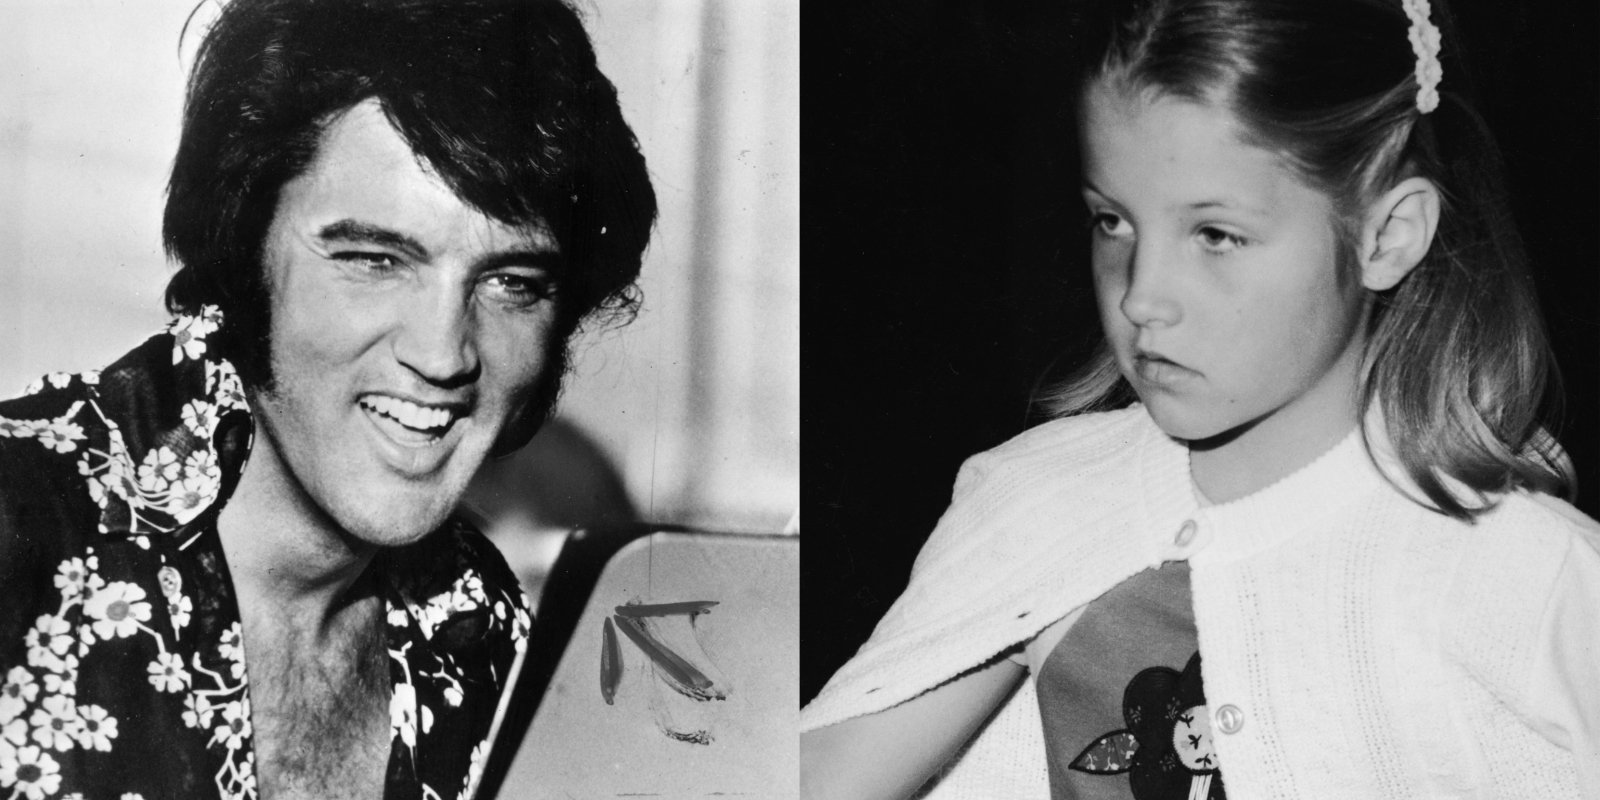 Elvis Presley and Lisa Marie Presley in side by side photos from the 1970s |